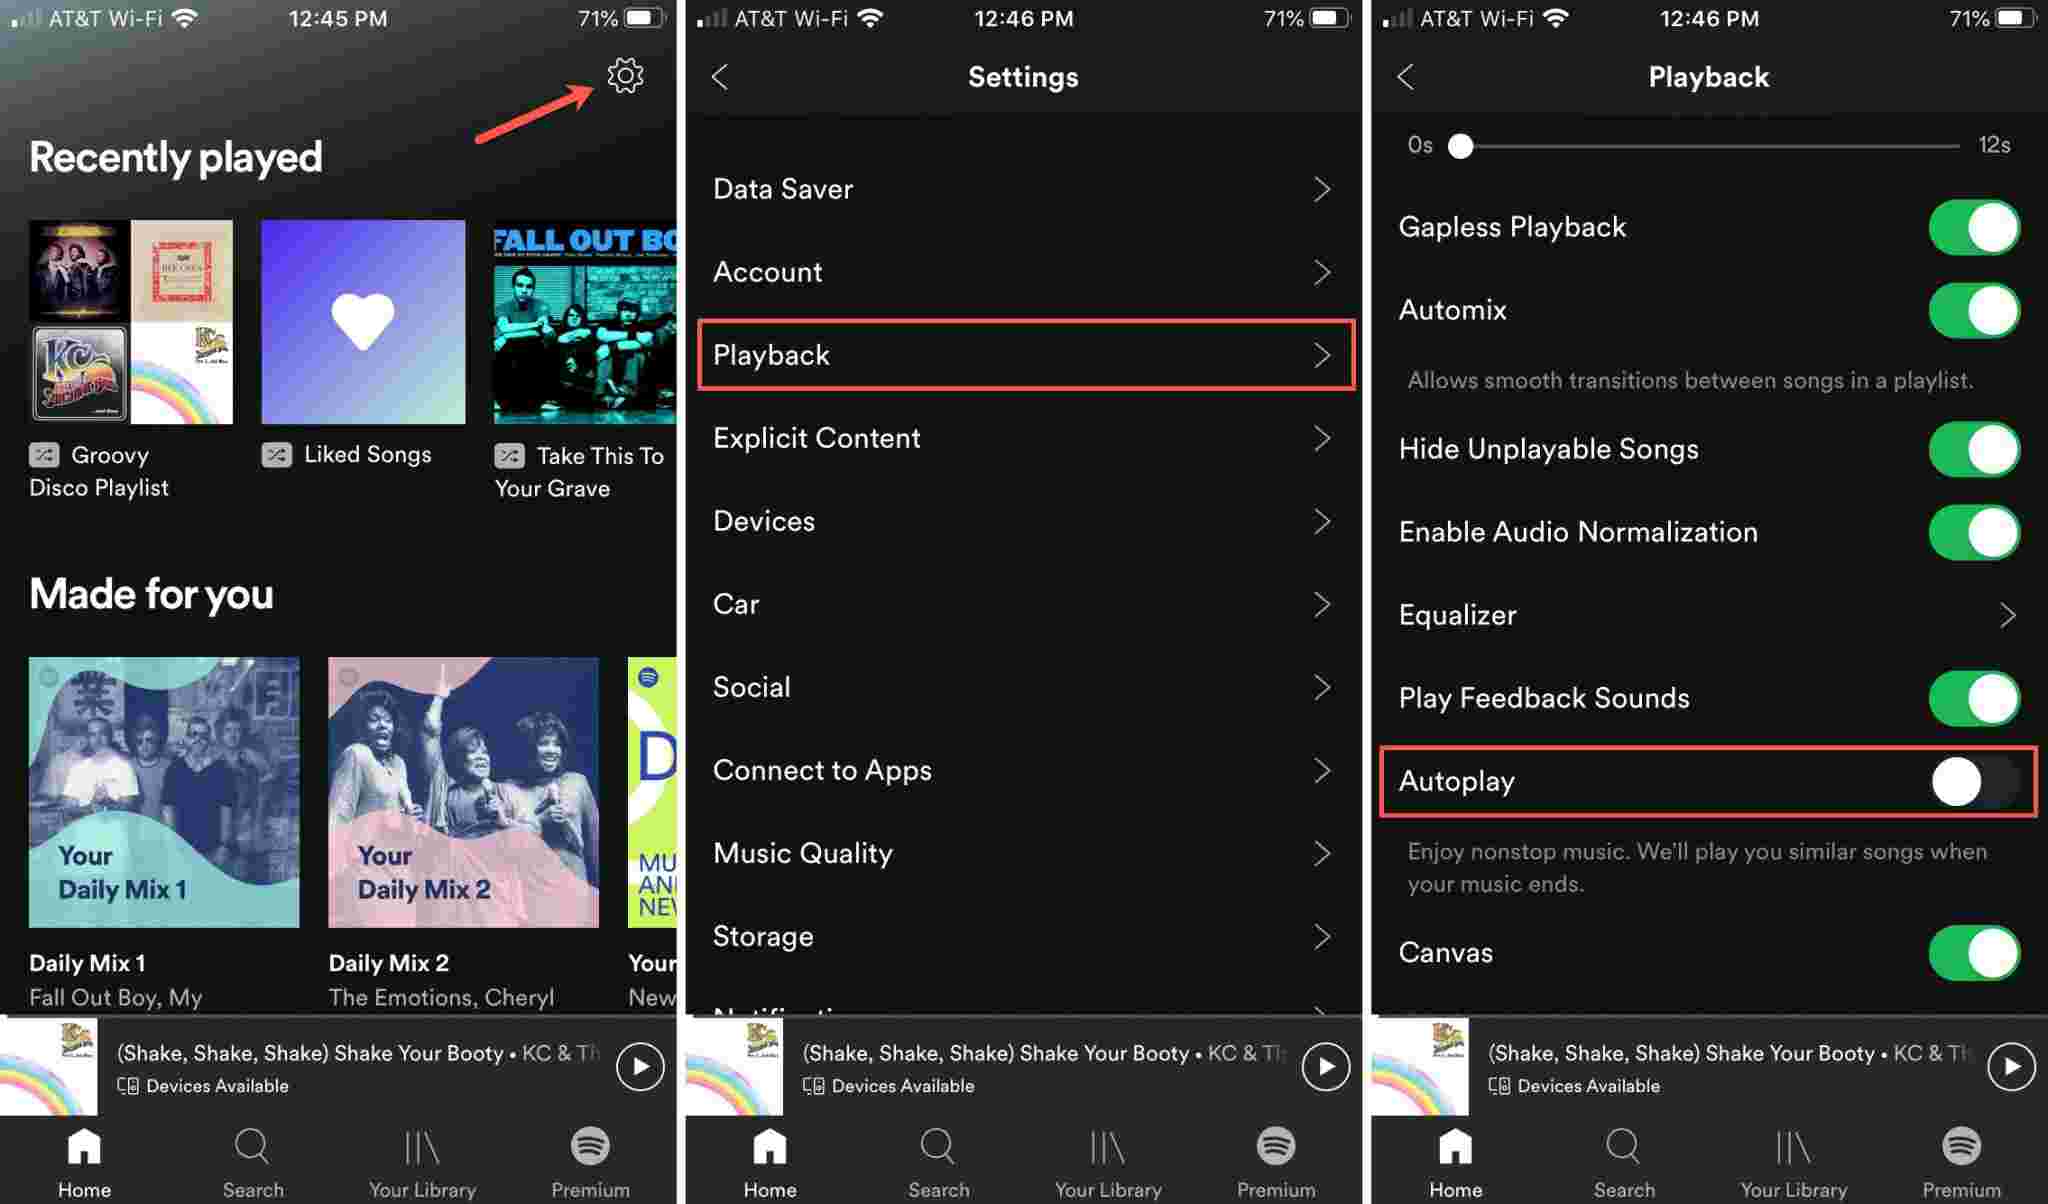 How To Fix Spotify Playing Random Songs - Turn Off The Autoplay Function